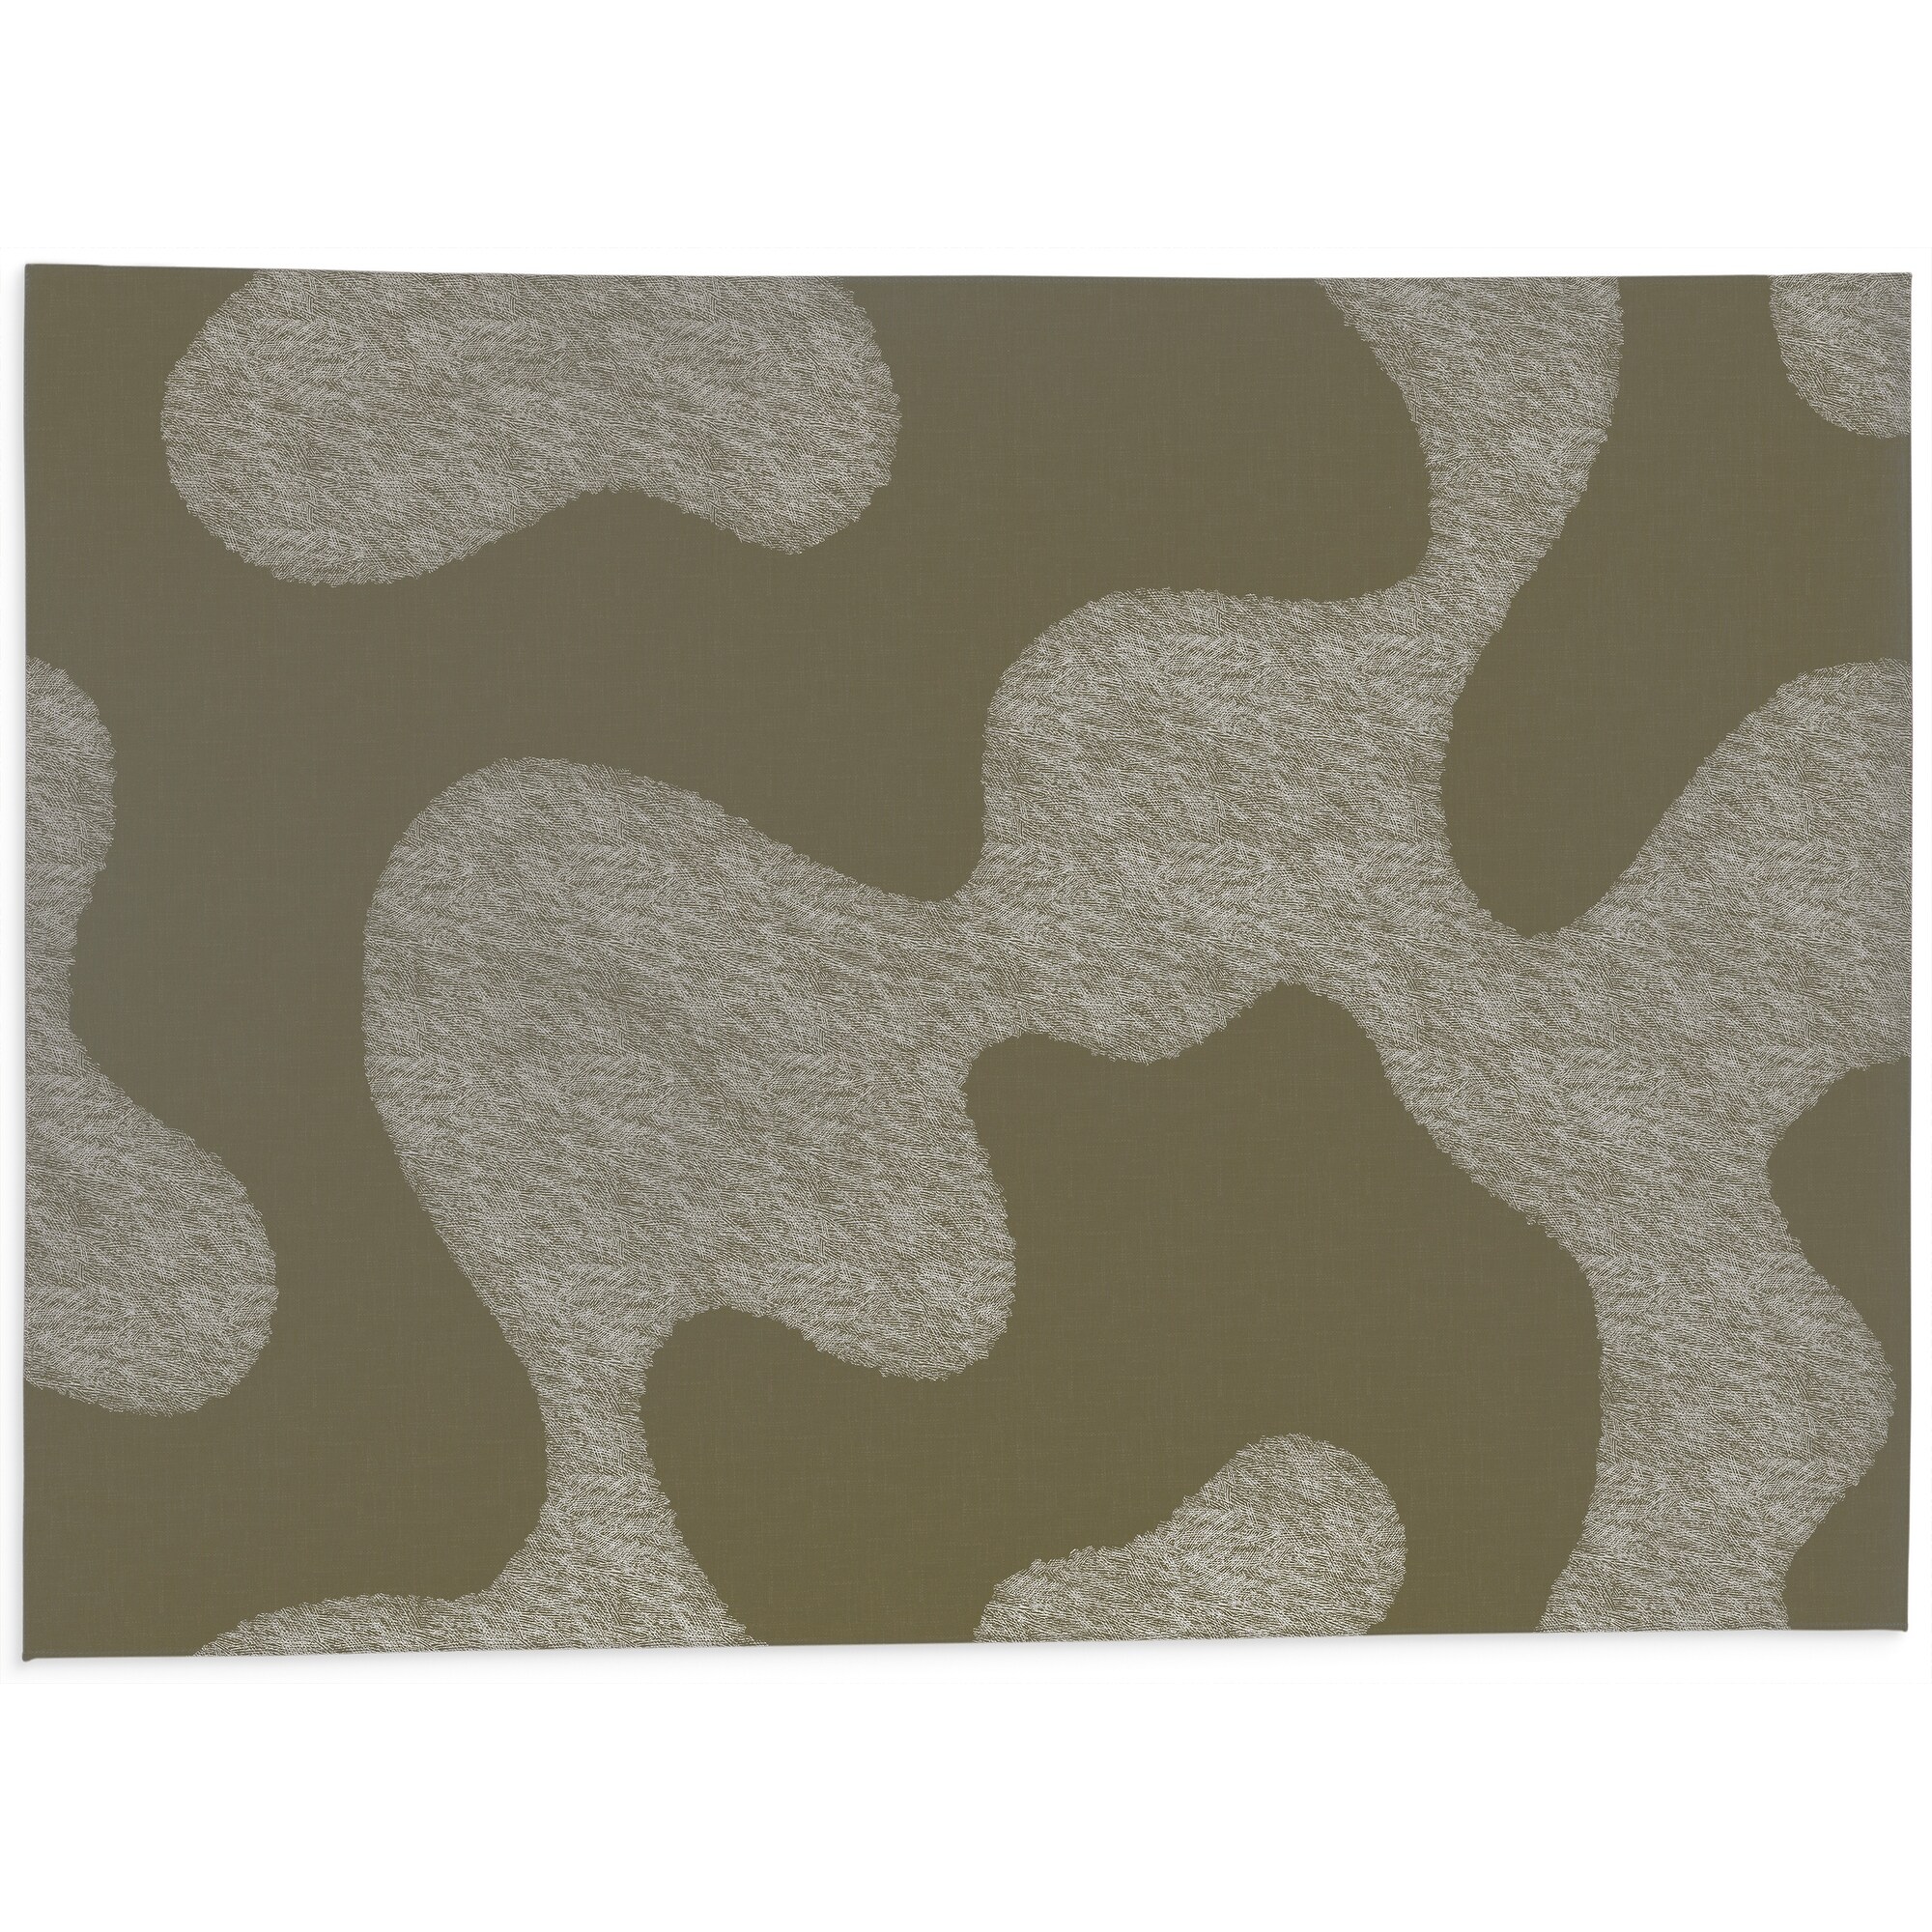 https://ak1.ostkcdn.com/images/products/is/images/direct/3034c08bf626986934fdc31d7997eb82297133e8/MORPH-%26-SKETCH-CAMO-Kitchen-Mat-By-Kavka-Designs.jpg